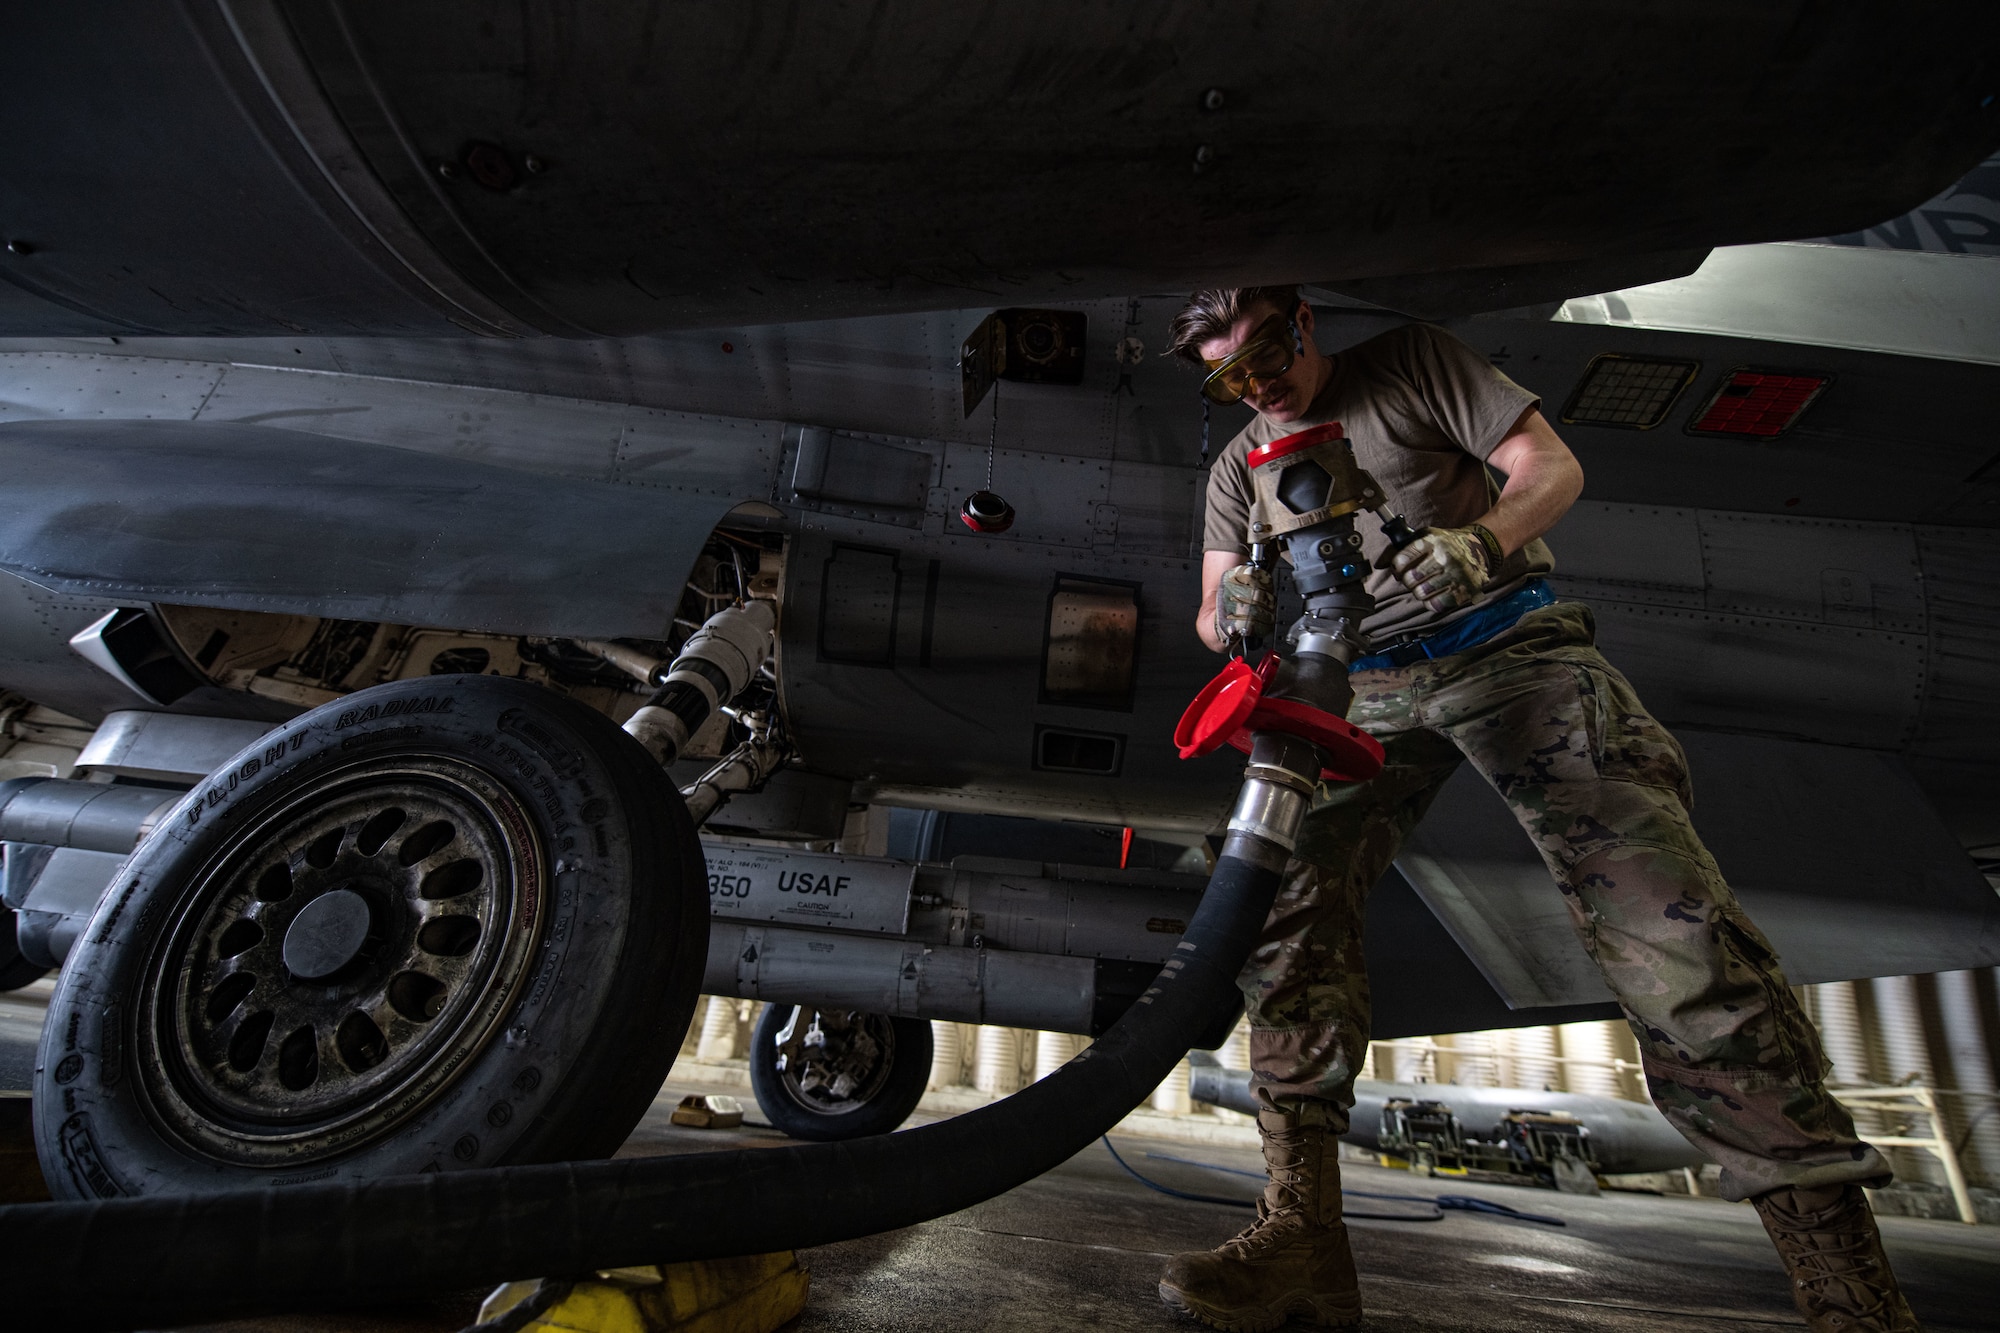 Senior Airman Ridge Logan, 8th Aircraft Maintenance Squadron crew chief, adjusts a fuel hose before attaching it to an F-16 Fighting Falcon at Kunsan Air Base, Republic of Korea, April 28, 2022. Crew chiefs work closely with 8th Logistics Readiness Squadron petroleum, oil and lubricants flight (POL) technicians to ensure the refueling process is completed accurately and effectively. (U.S. Air Force photo by Staff Sgt. Gabrielle Spalding)